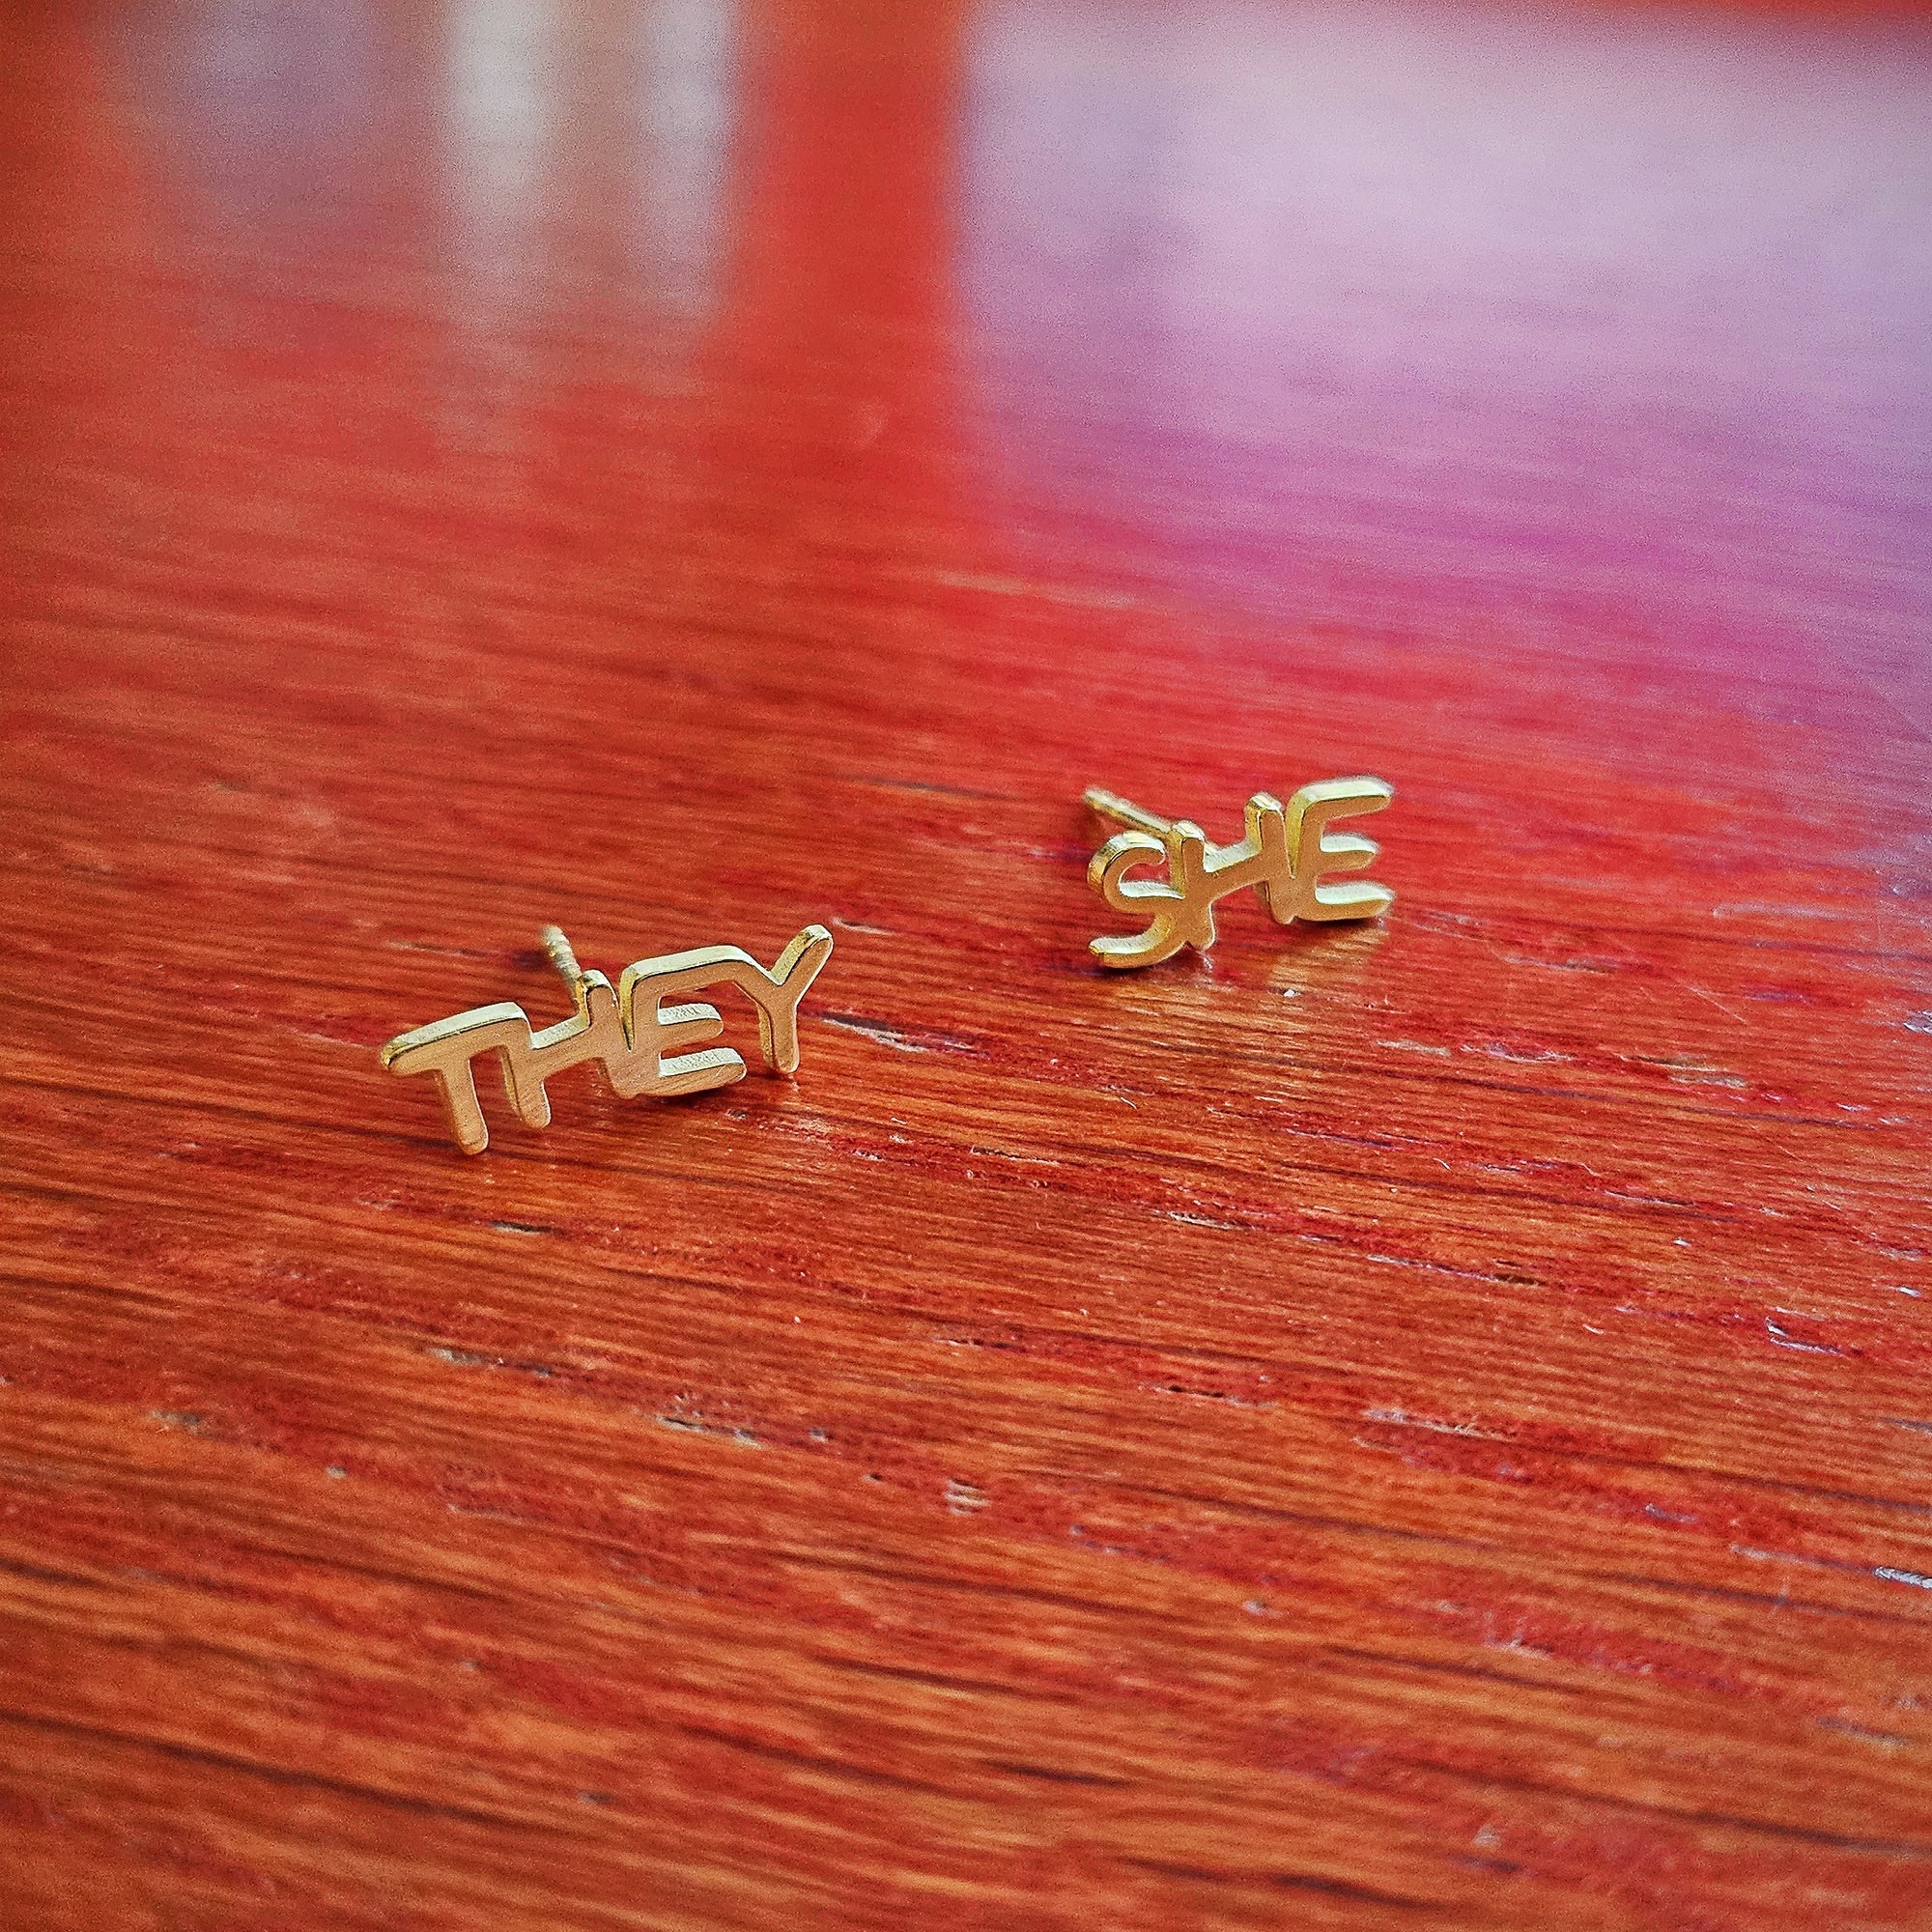 Gold Pronoun Stud Earrings - she/they or they/she